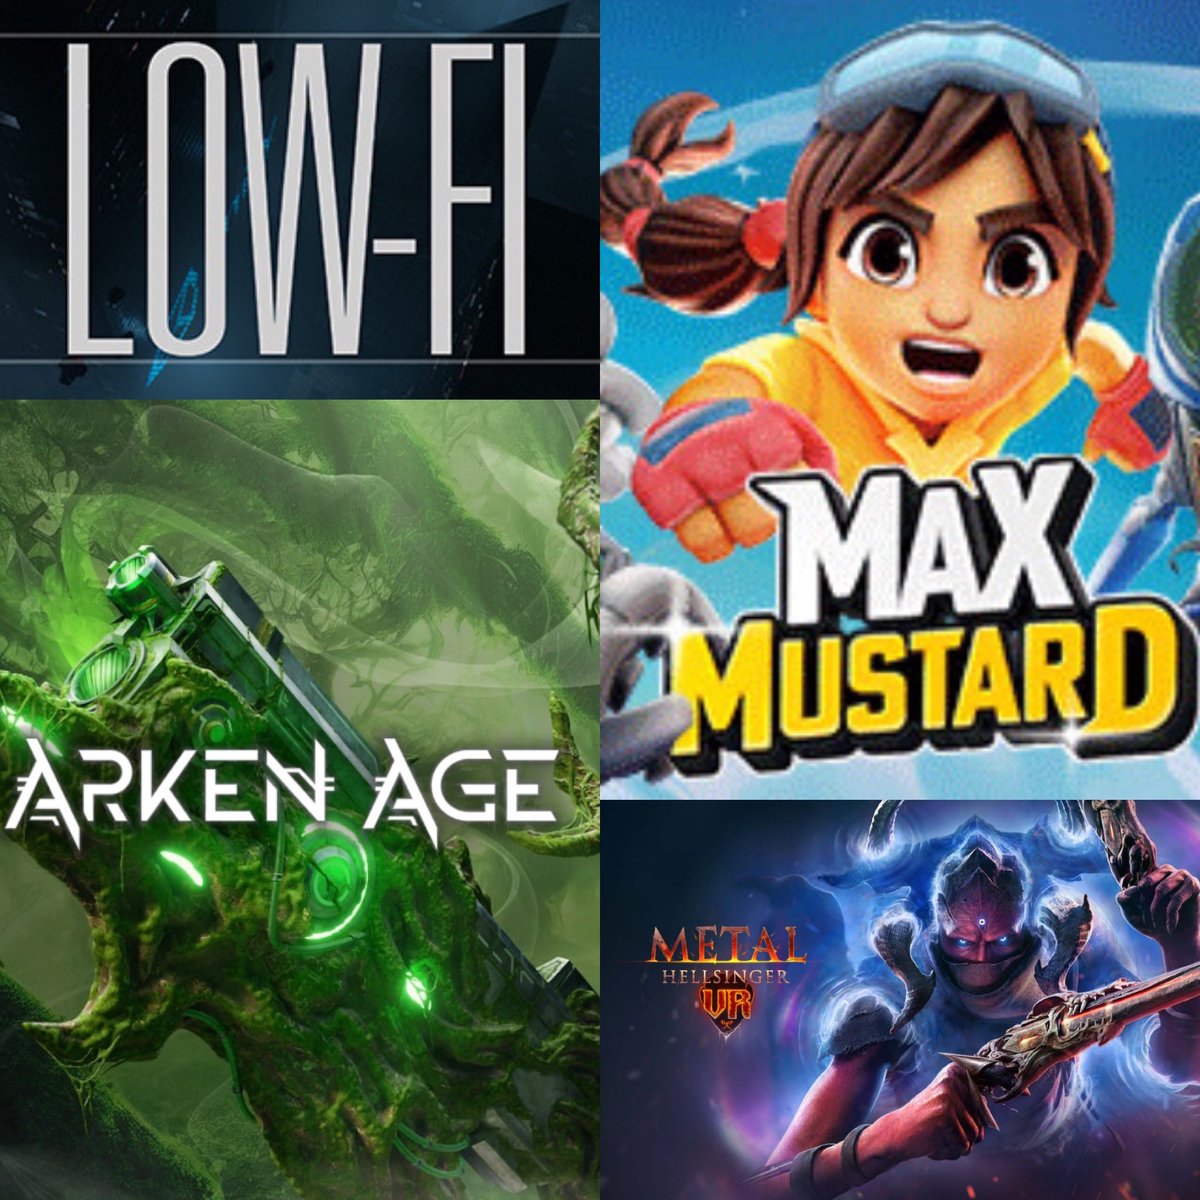 Four upcoming #PSVR2 games I am excited about! Follow:

Arken Age - @ArkenAgeVR 
Low-Fi - @Anticleric 
Max Mustard - @MaxMustardGame 
Metal: Hellsinger - @MetalHellsinger 

#Playstation #PS5 #vr #playstation5 #vrgaming